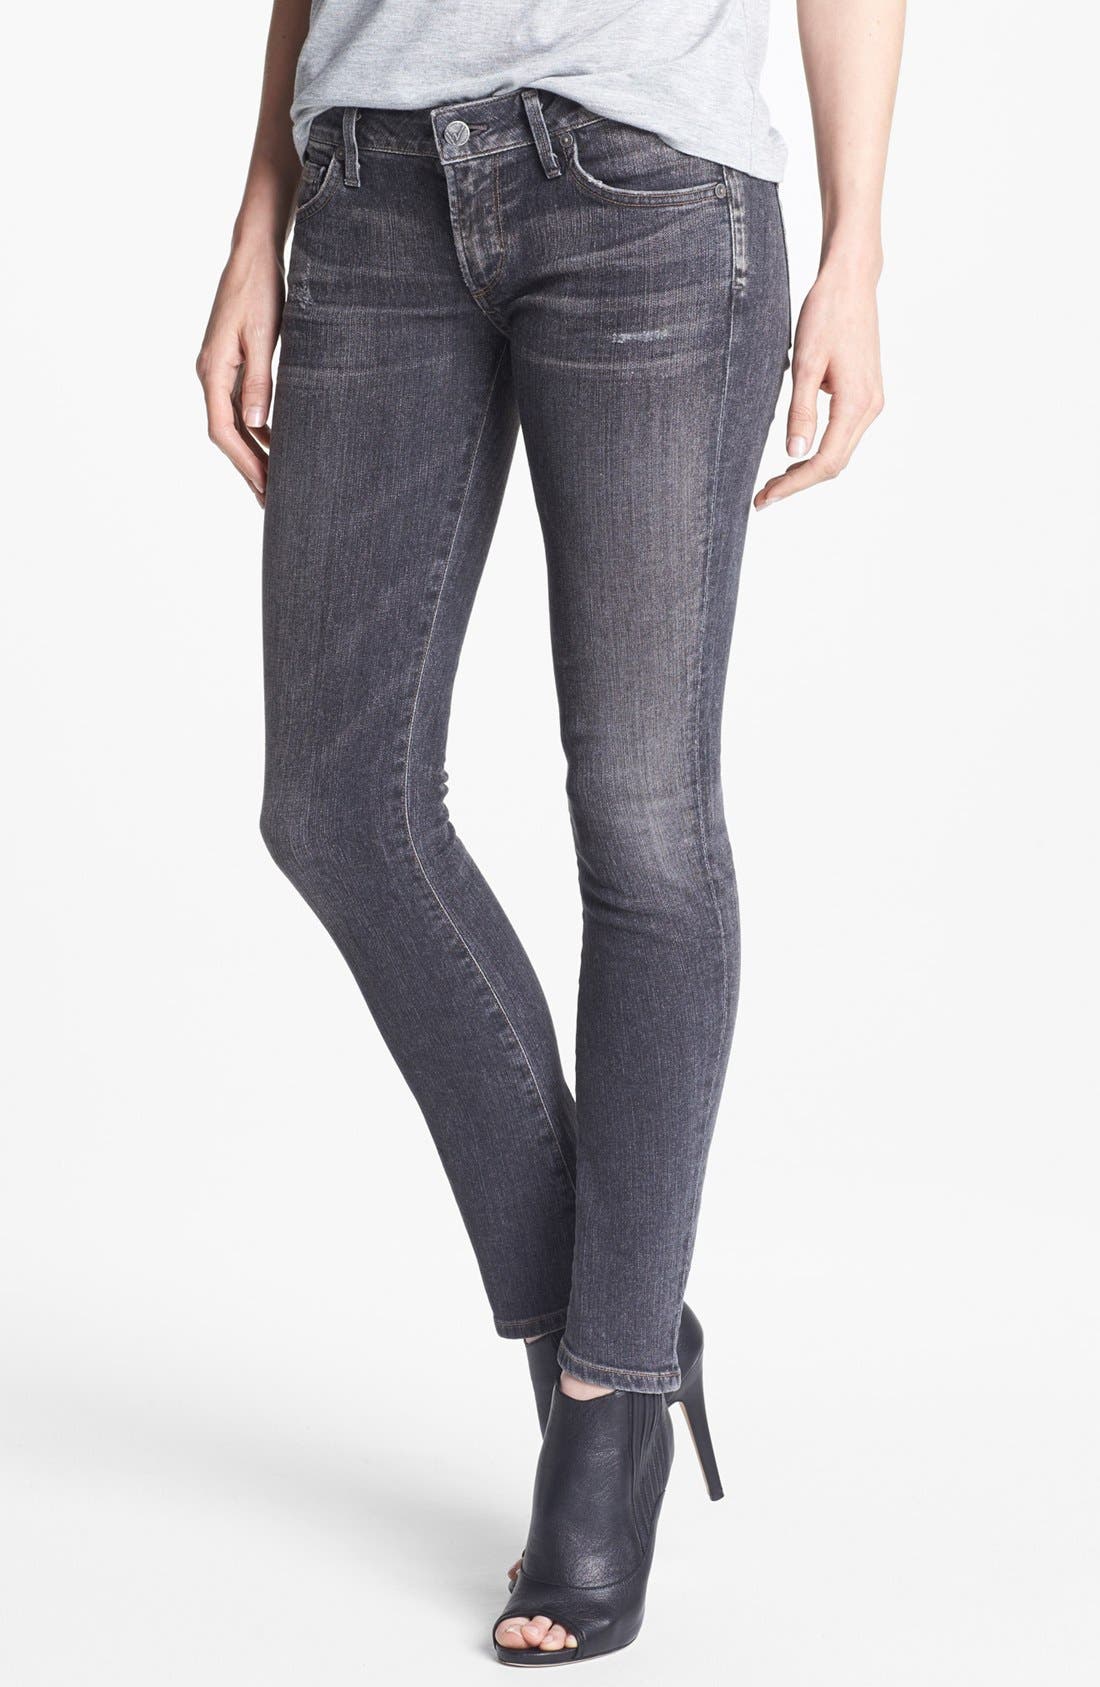 citizens of humanity racer low rise skinny jeans